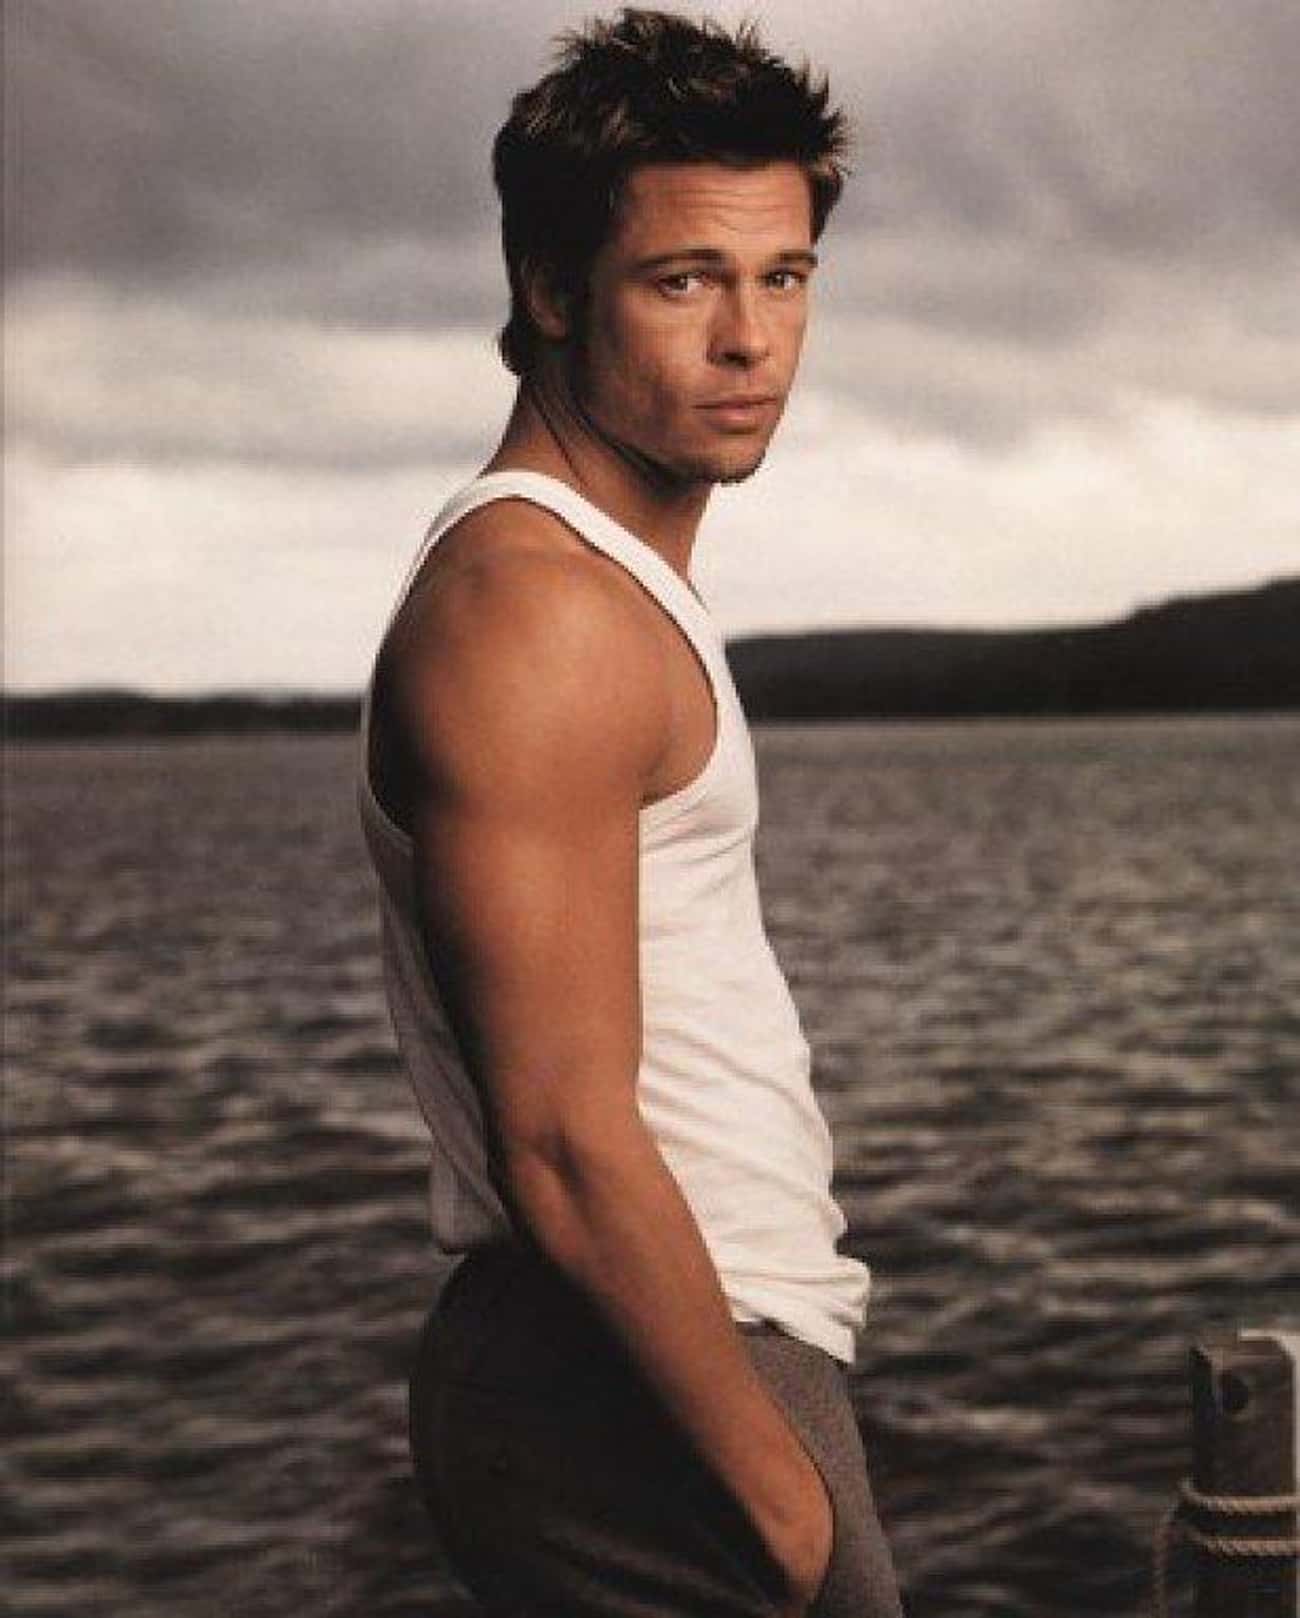 Brad Pitt Has A Butt You Could Take A Bite Out Of